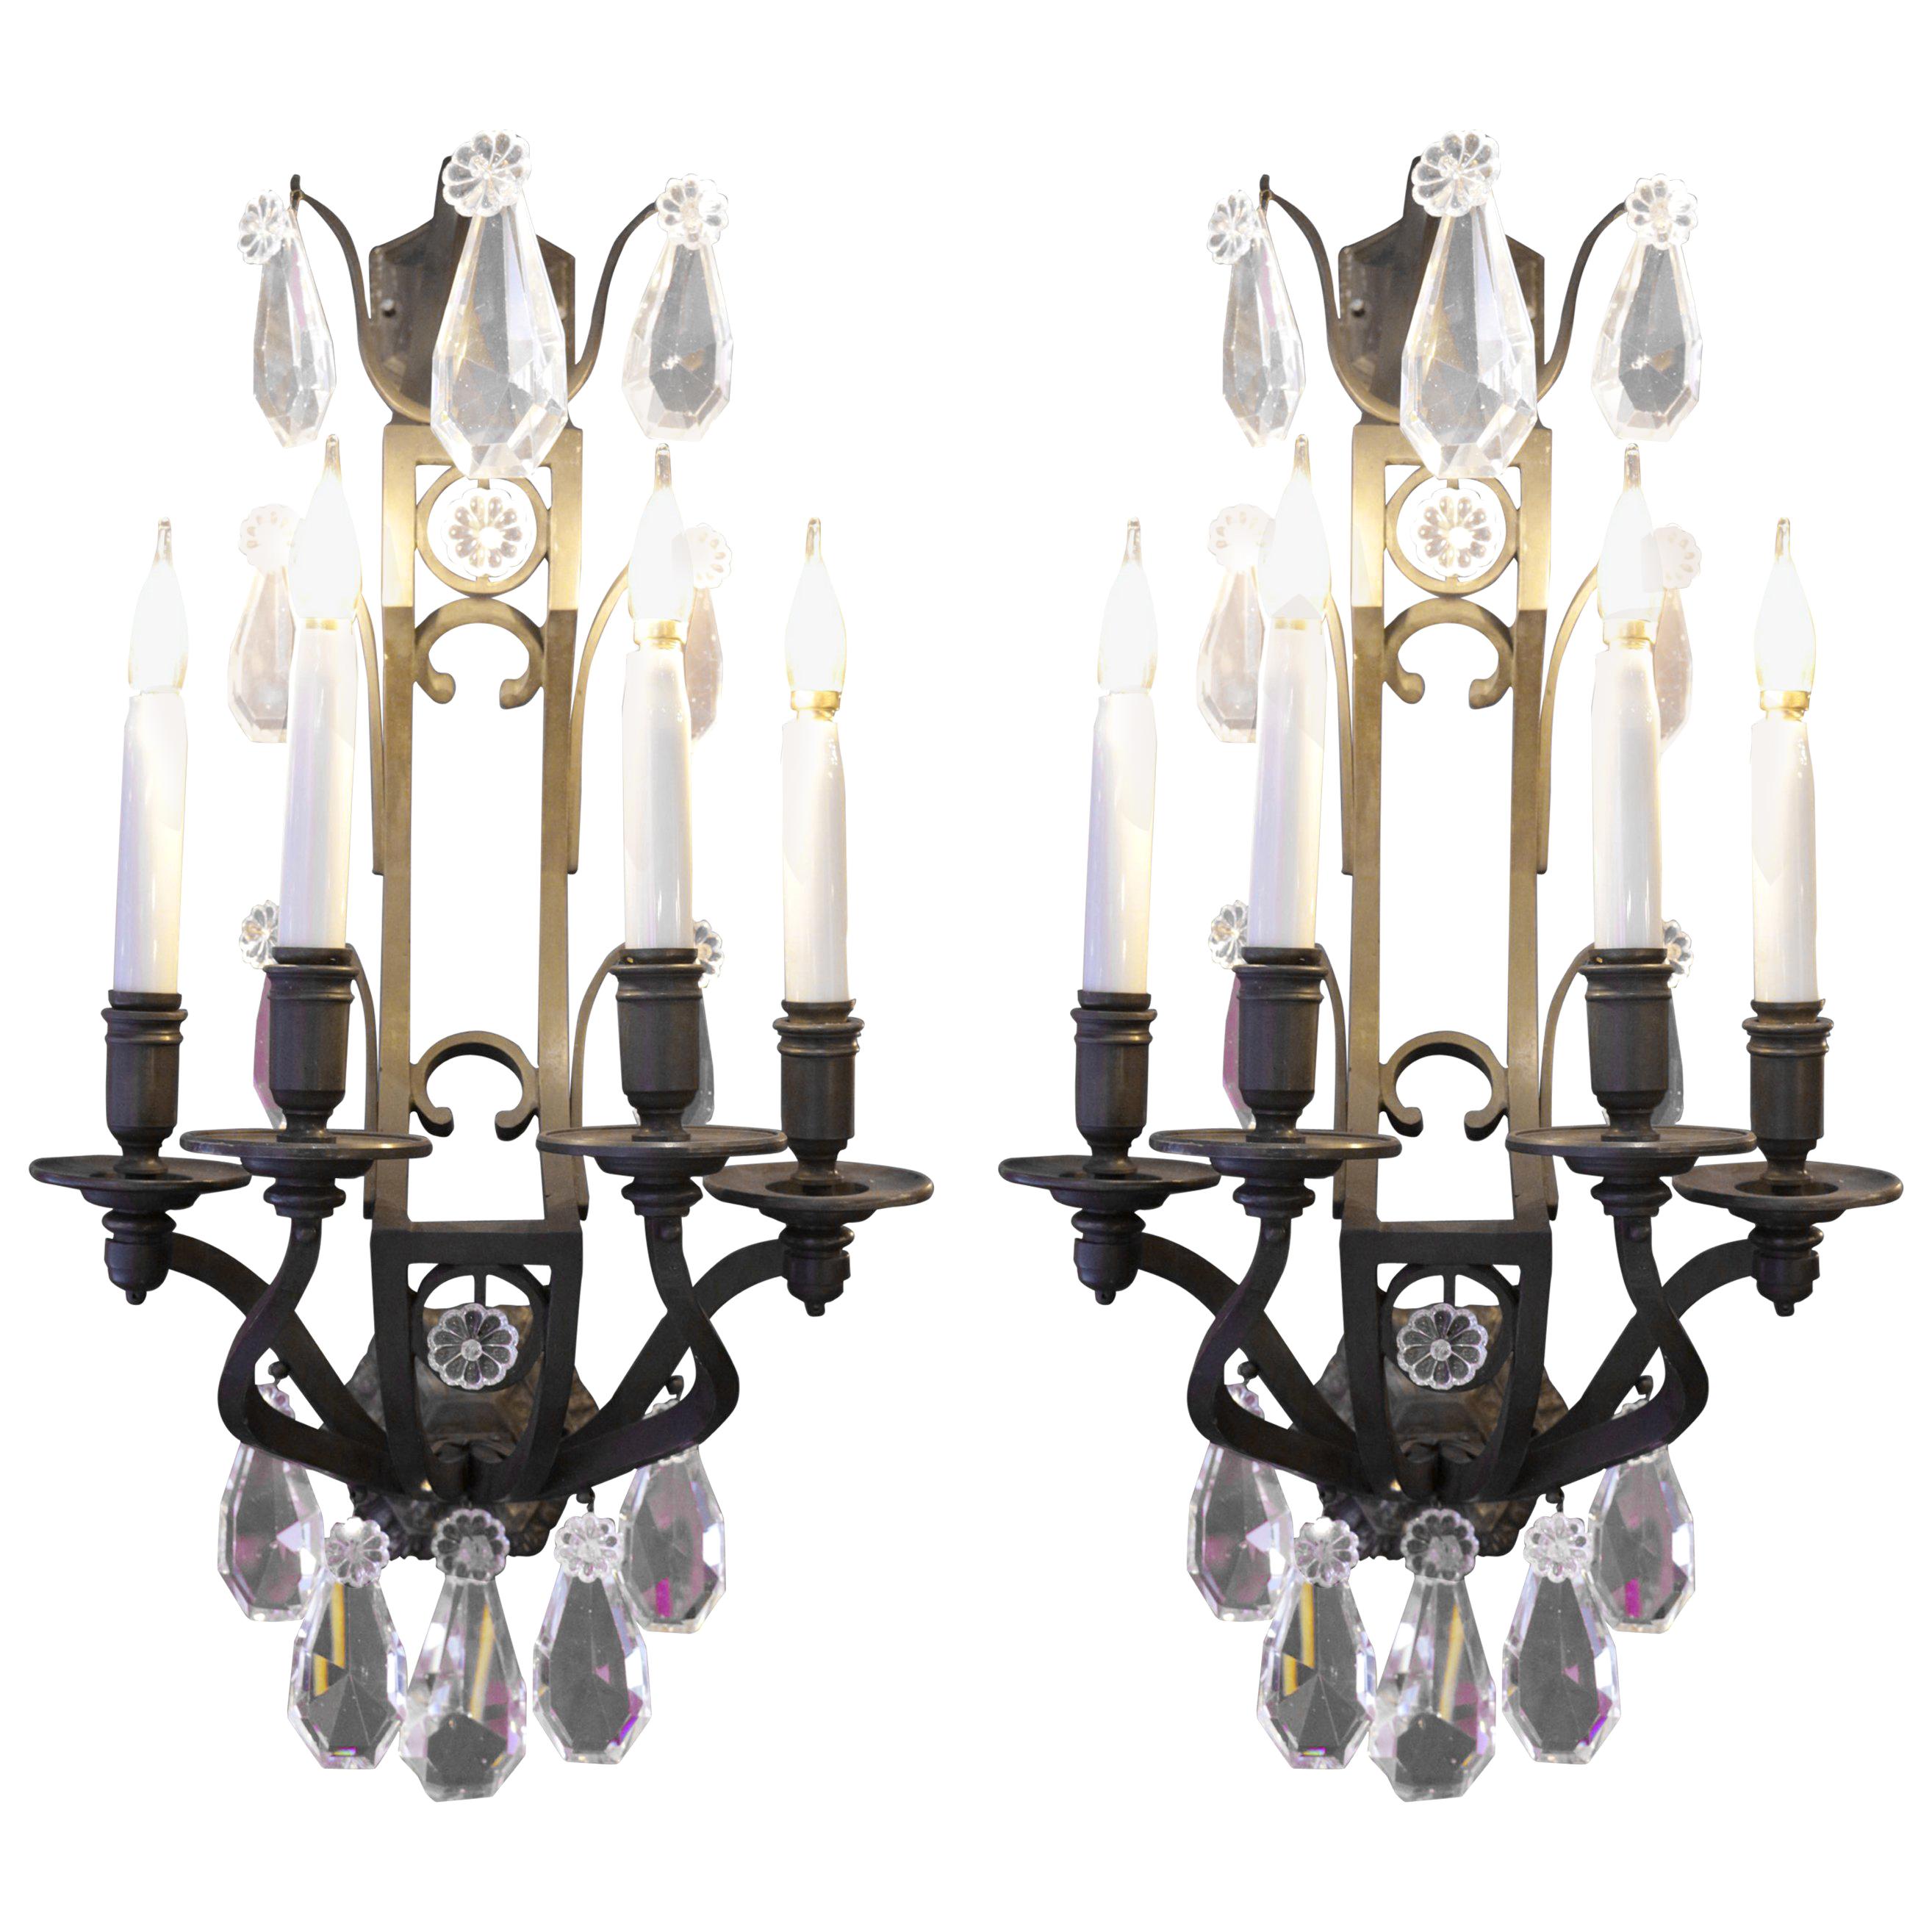 Pair of Important Sconces in Bronze with Crystals from the 19th Century